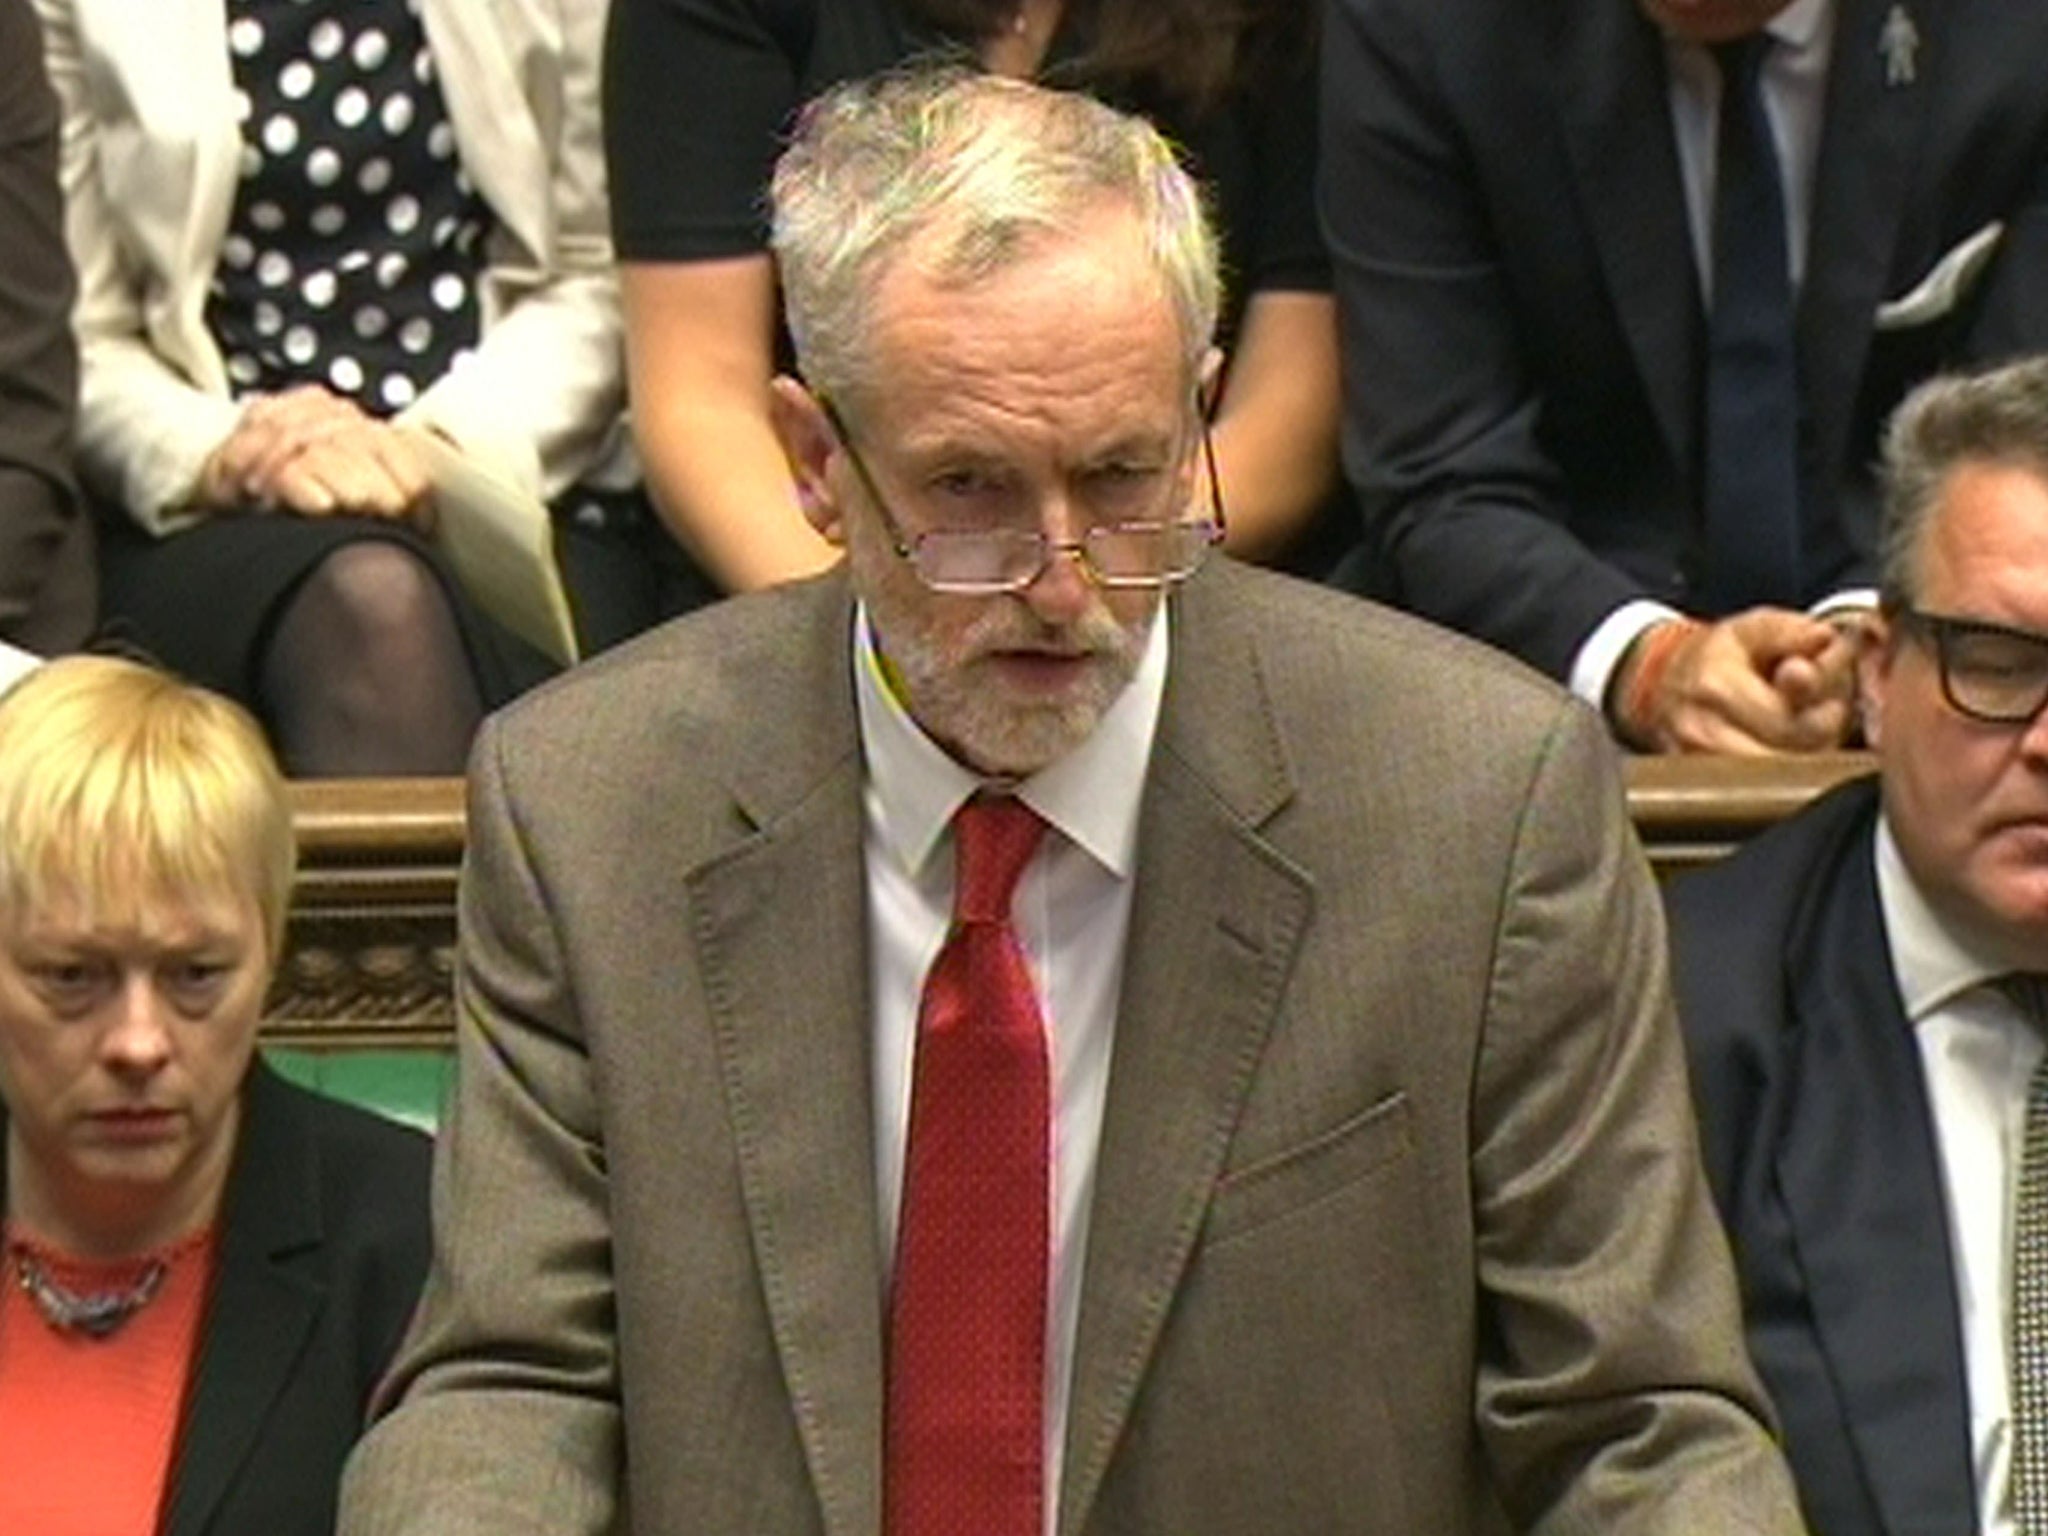 Jeremy Corbyn is a long-standing opponent to military intervention